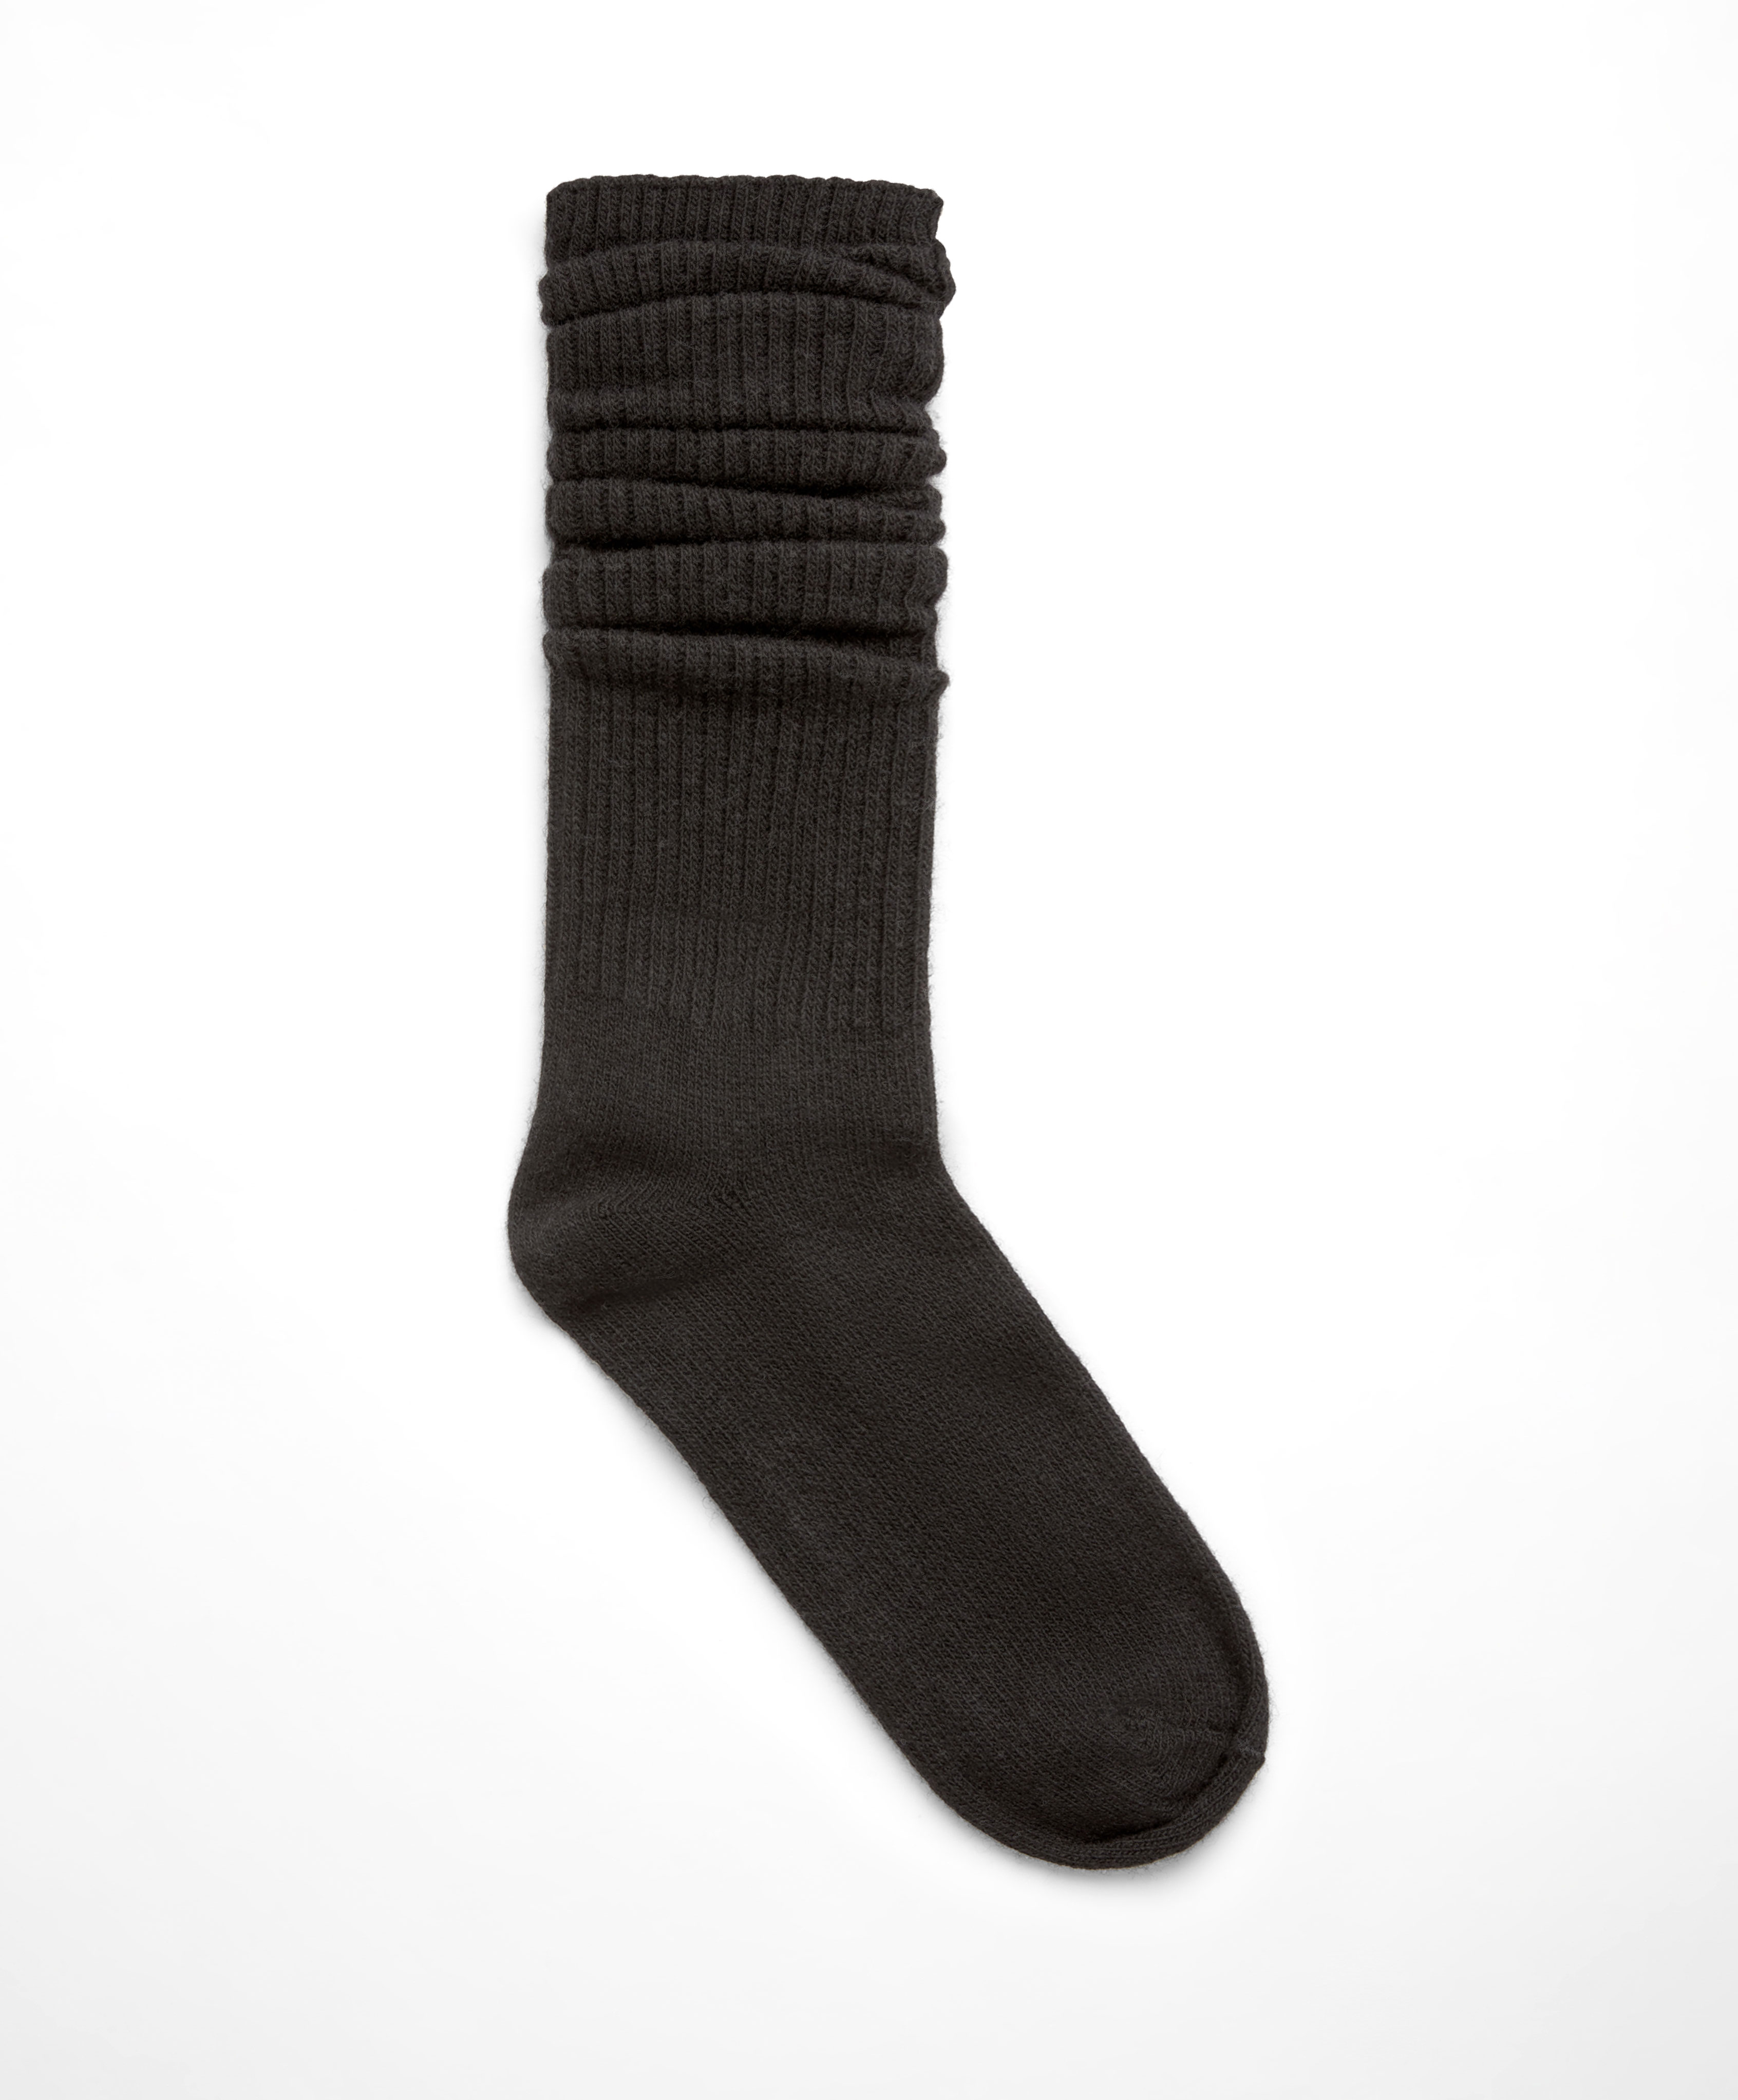 Long cashmere and wool socks